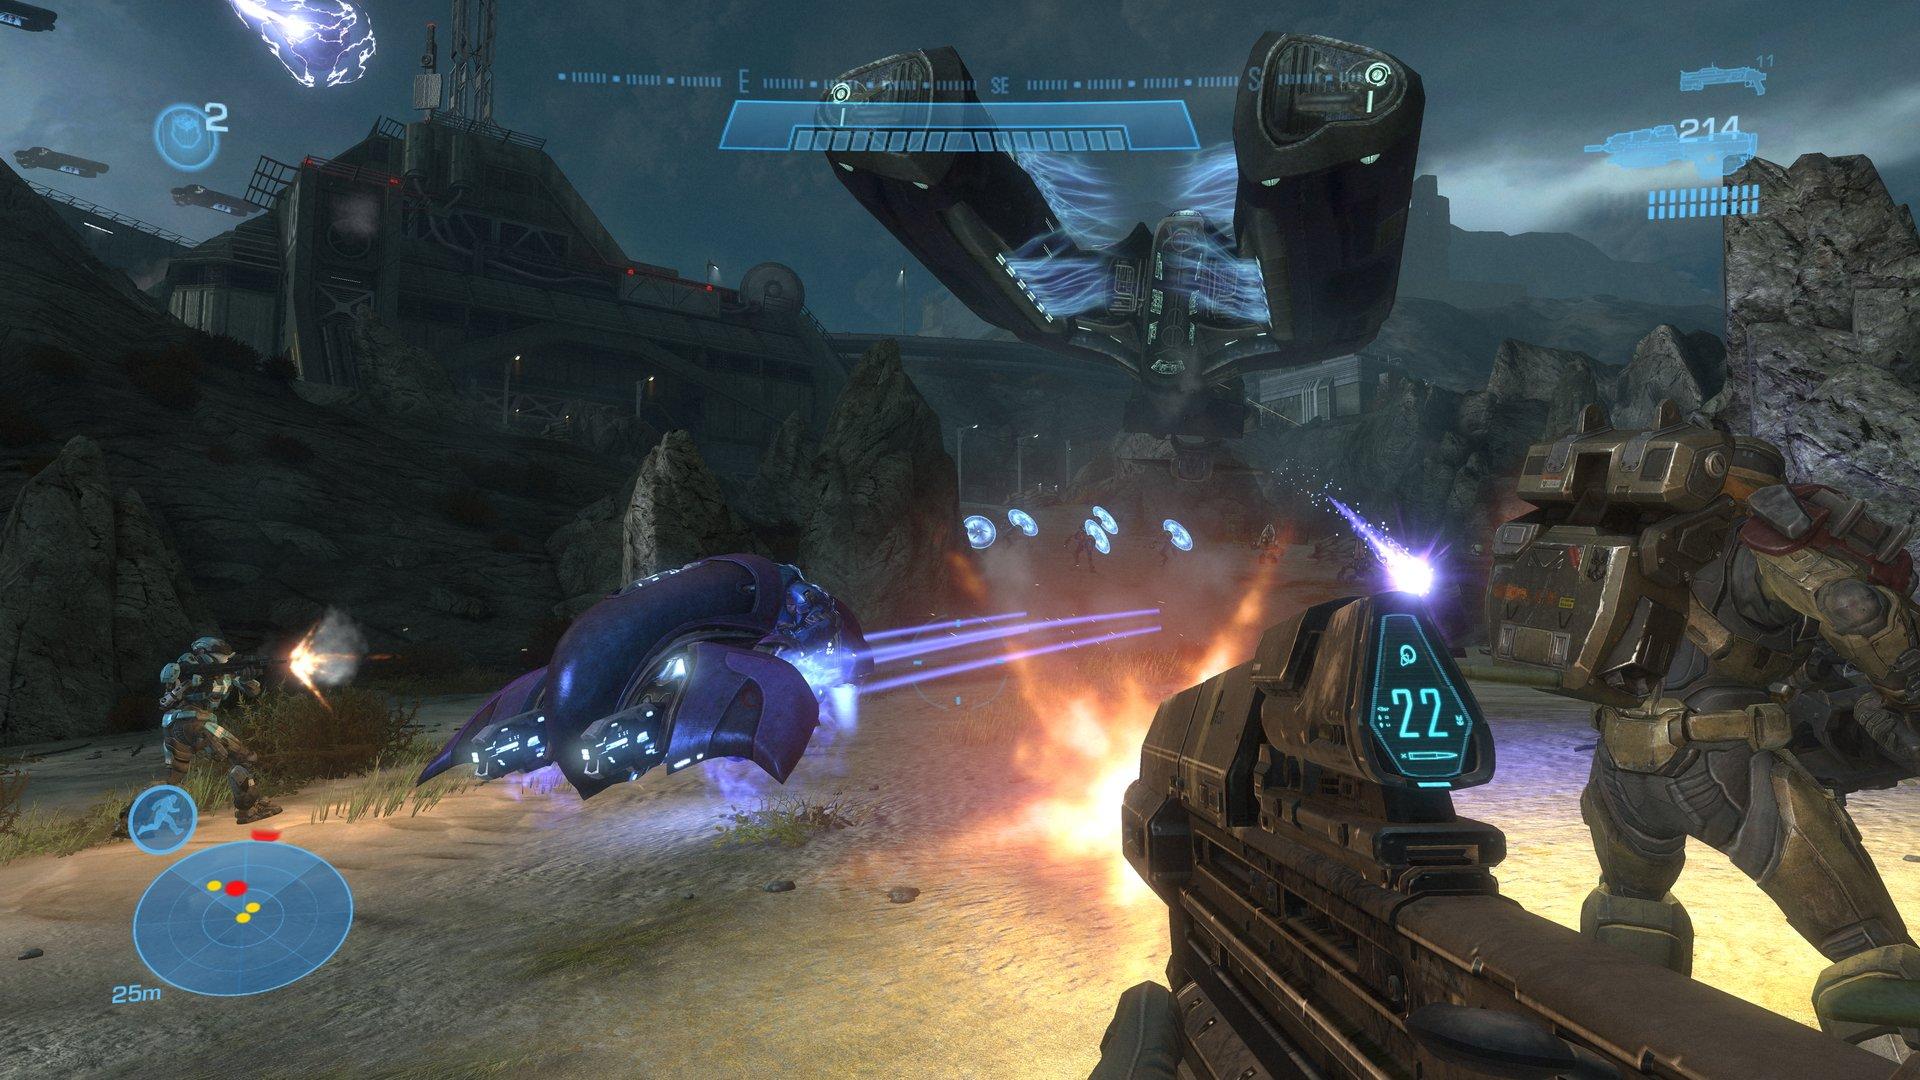 Halo: Reach could be out for PC on December 3 (and Xbox One later